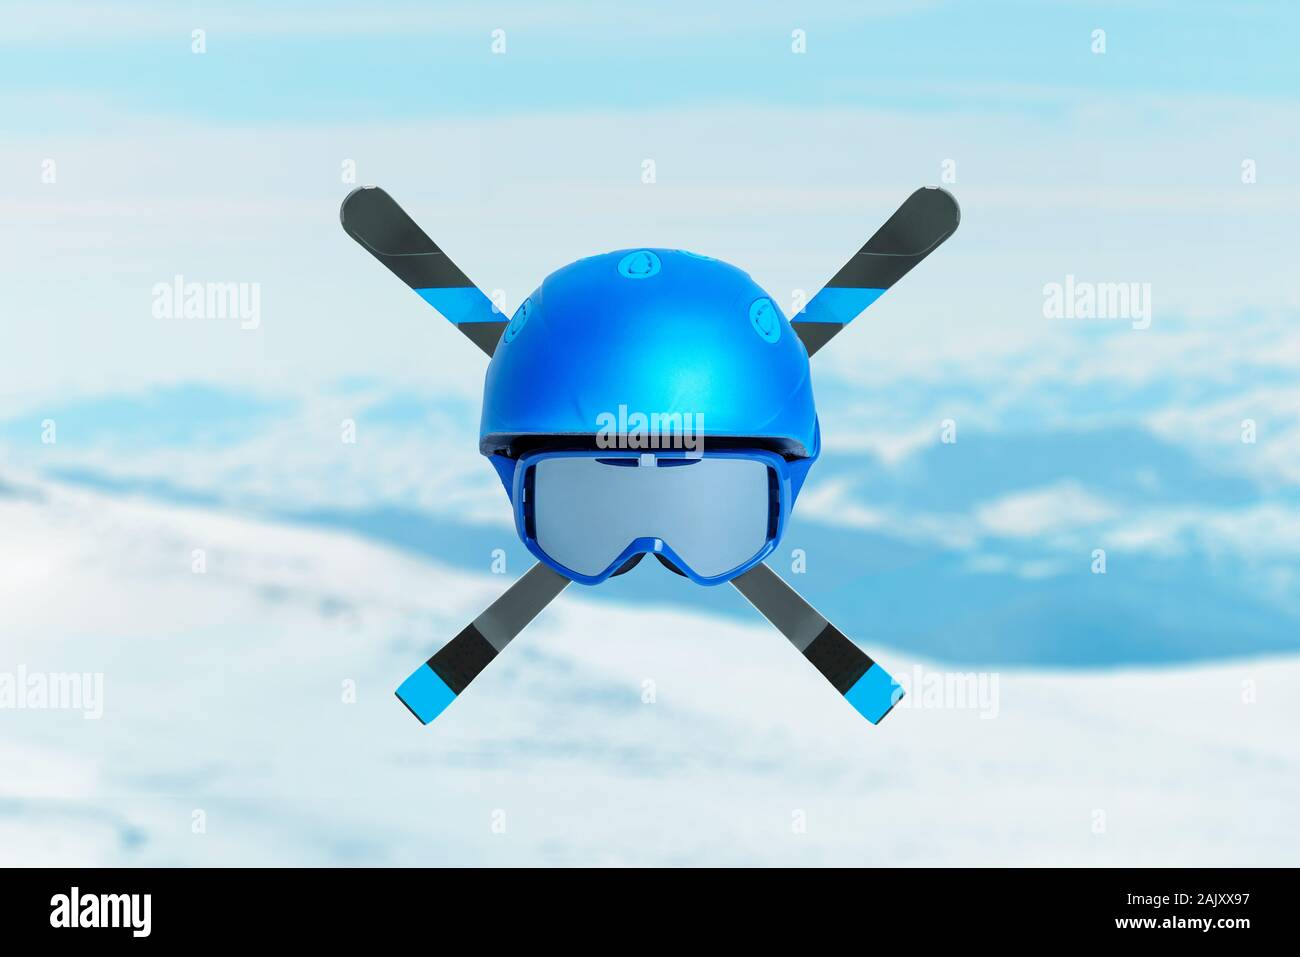 Blue ski helmet with glasses and skis crossed. Concept of extreme alpine sport. Mountain peaks in background Stock Photo